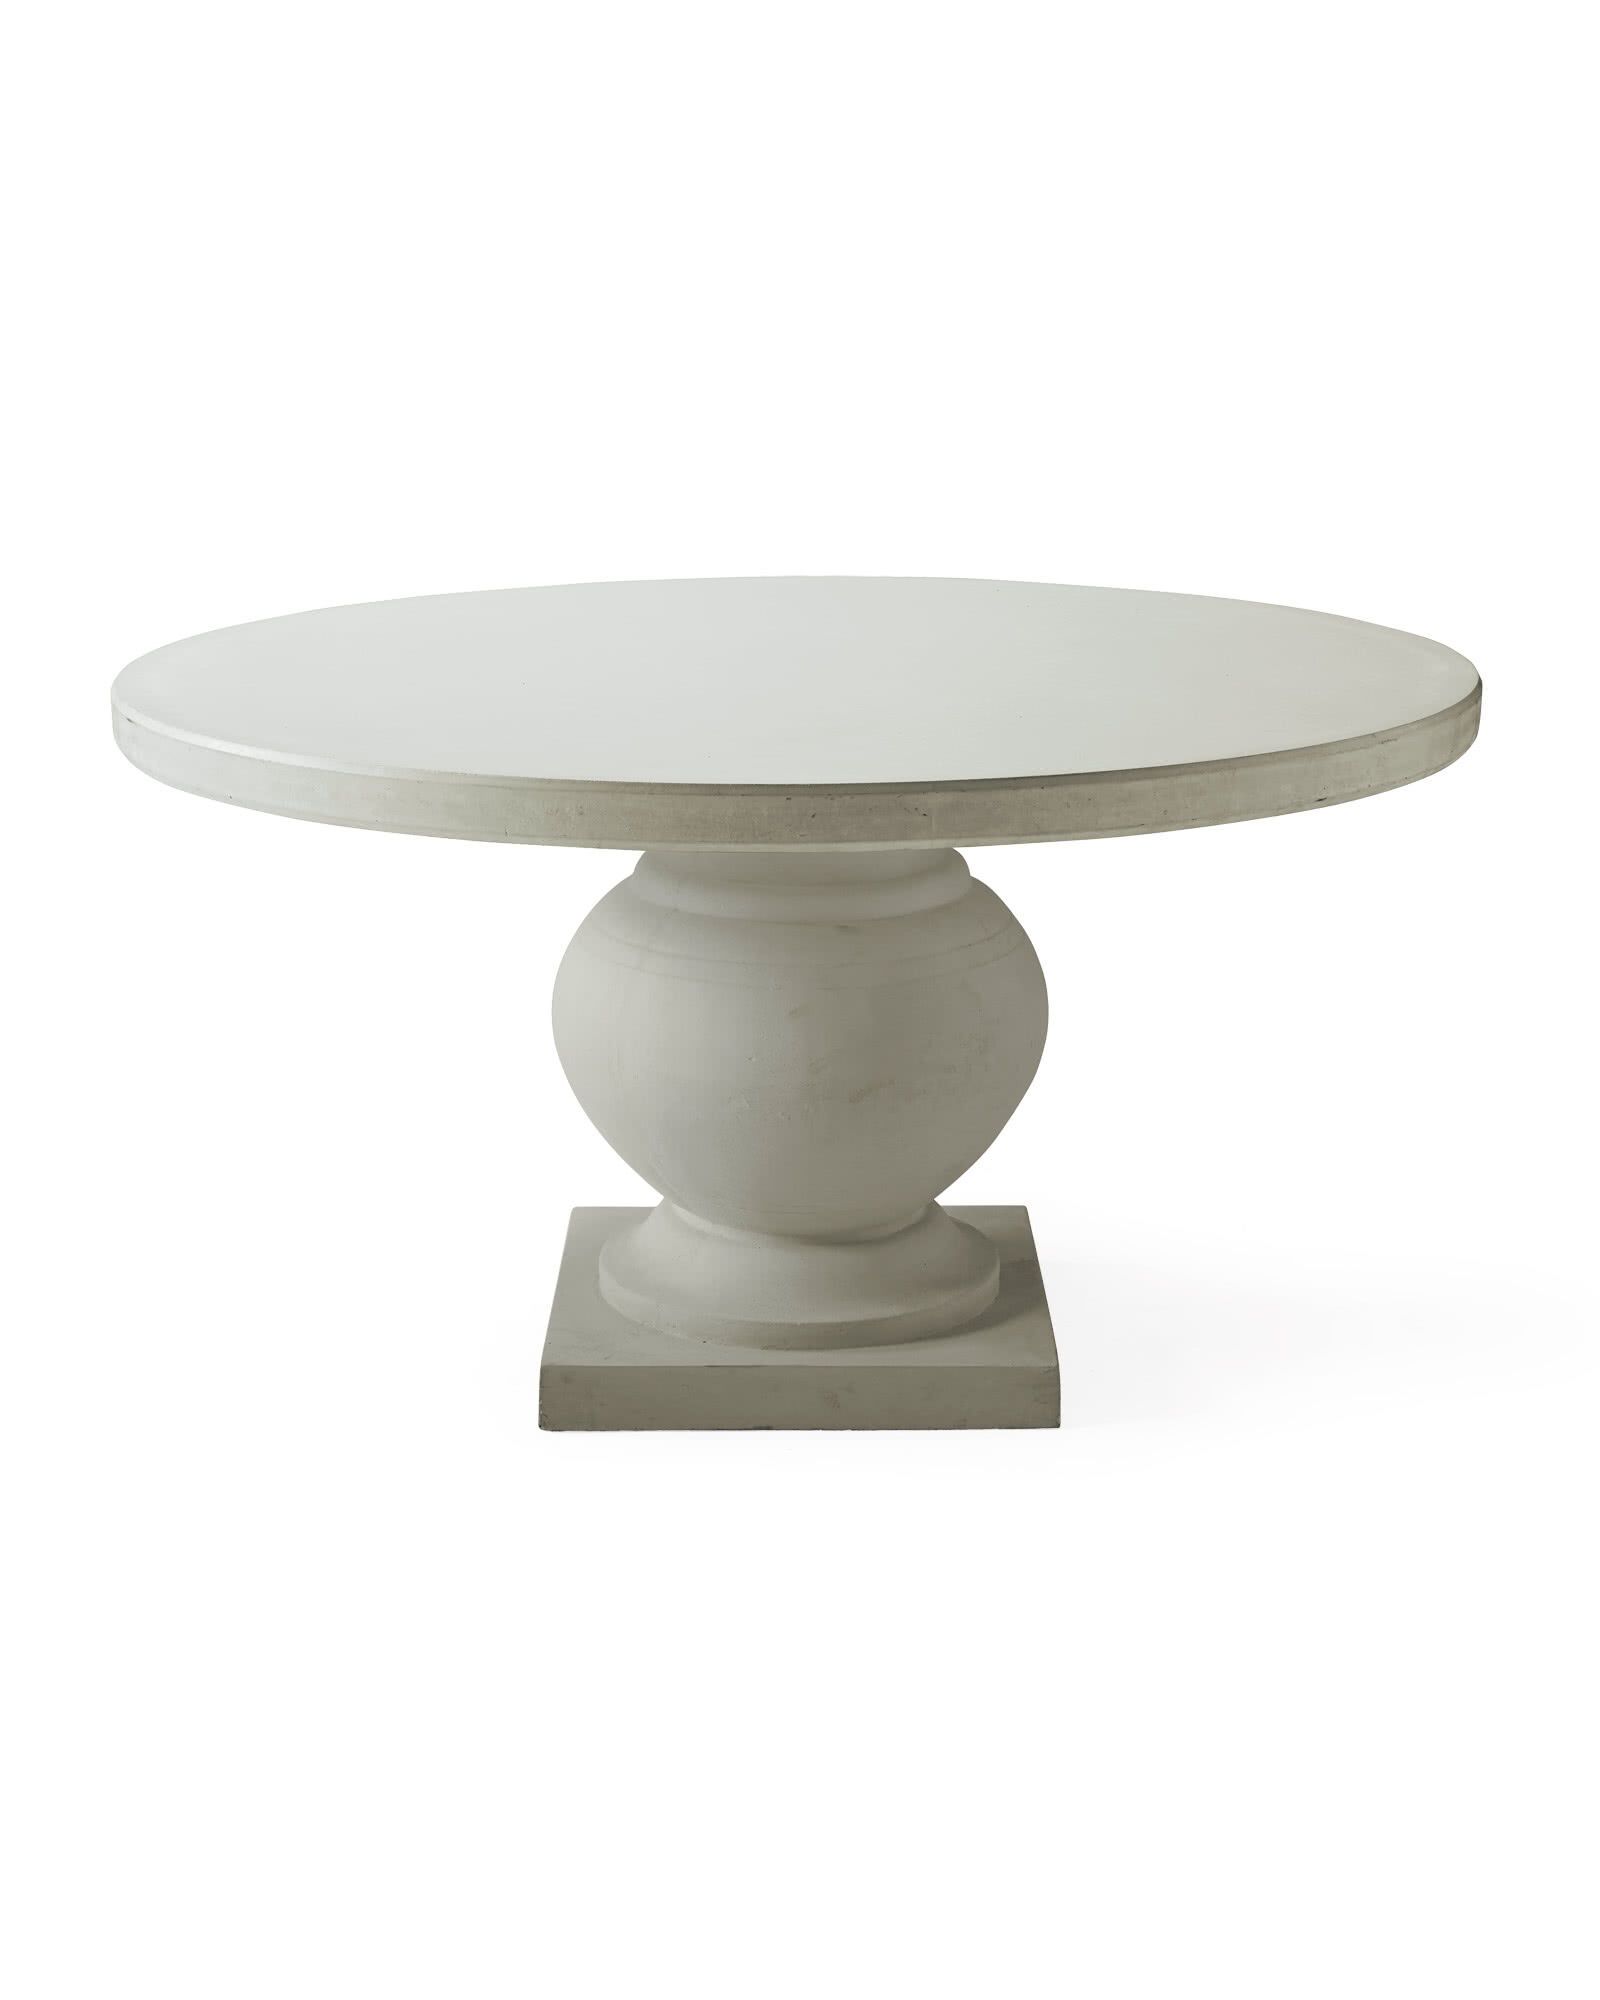 Terrace Round Dining Table - Fog/Fog | Serena and Lily